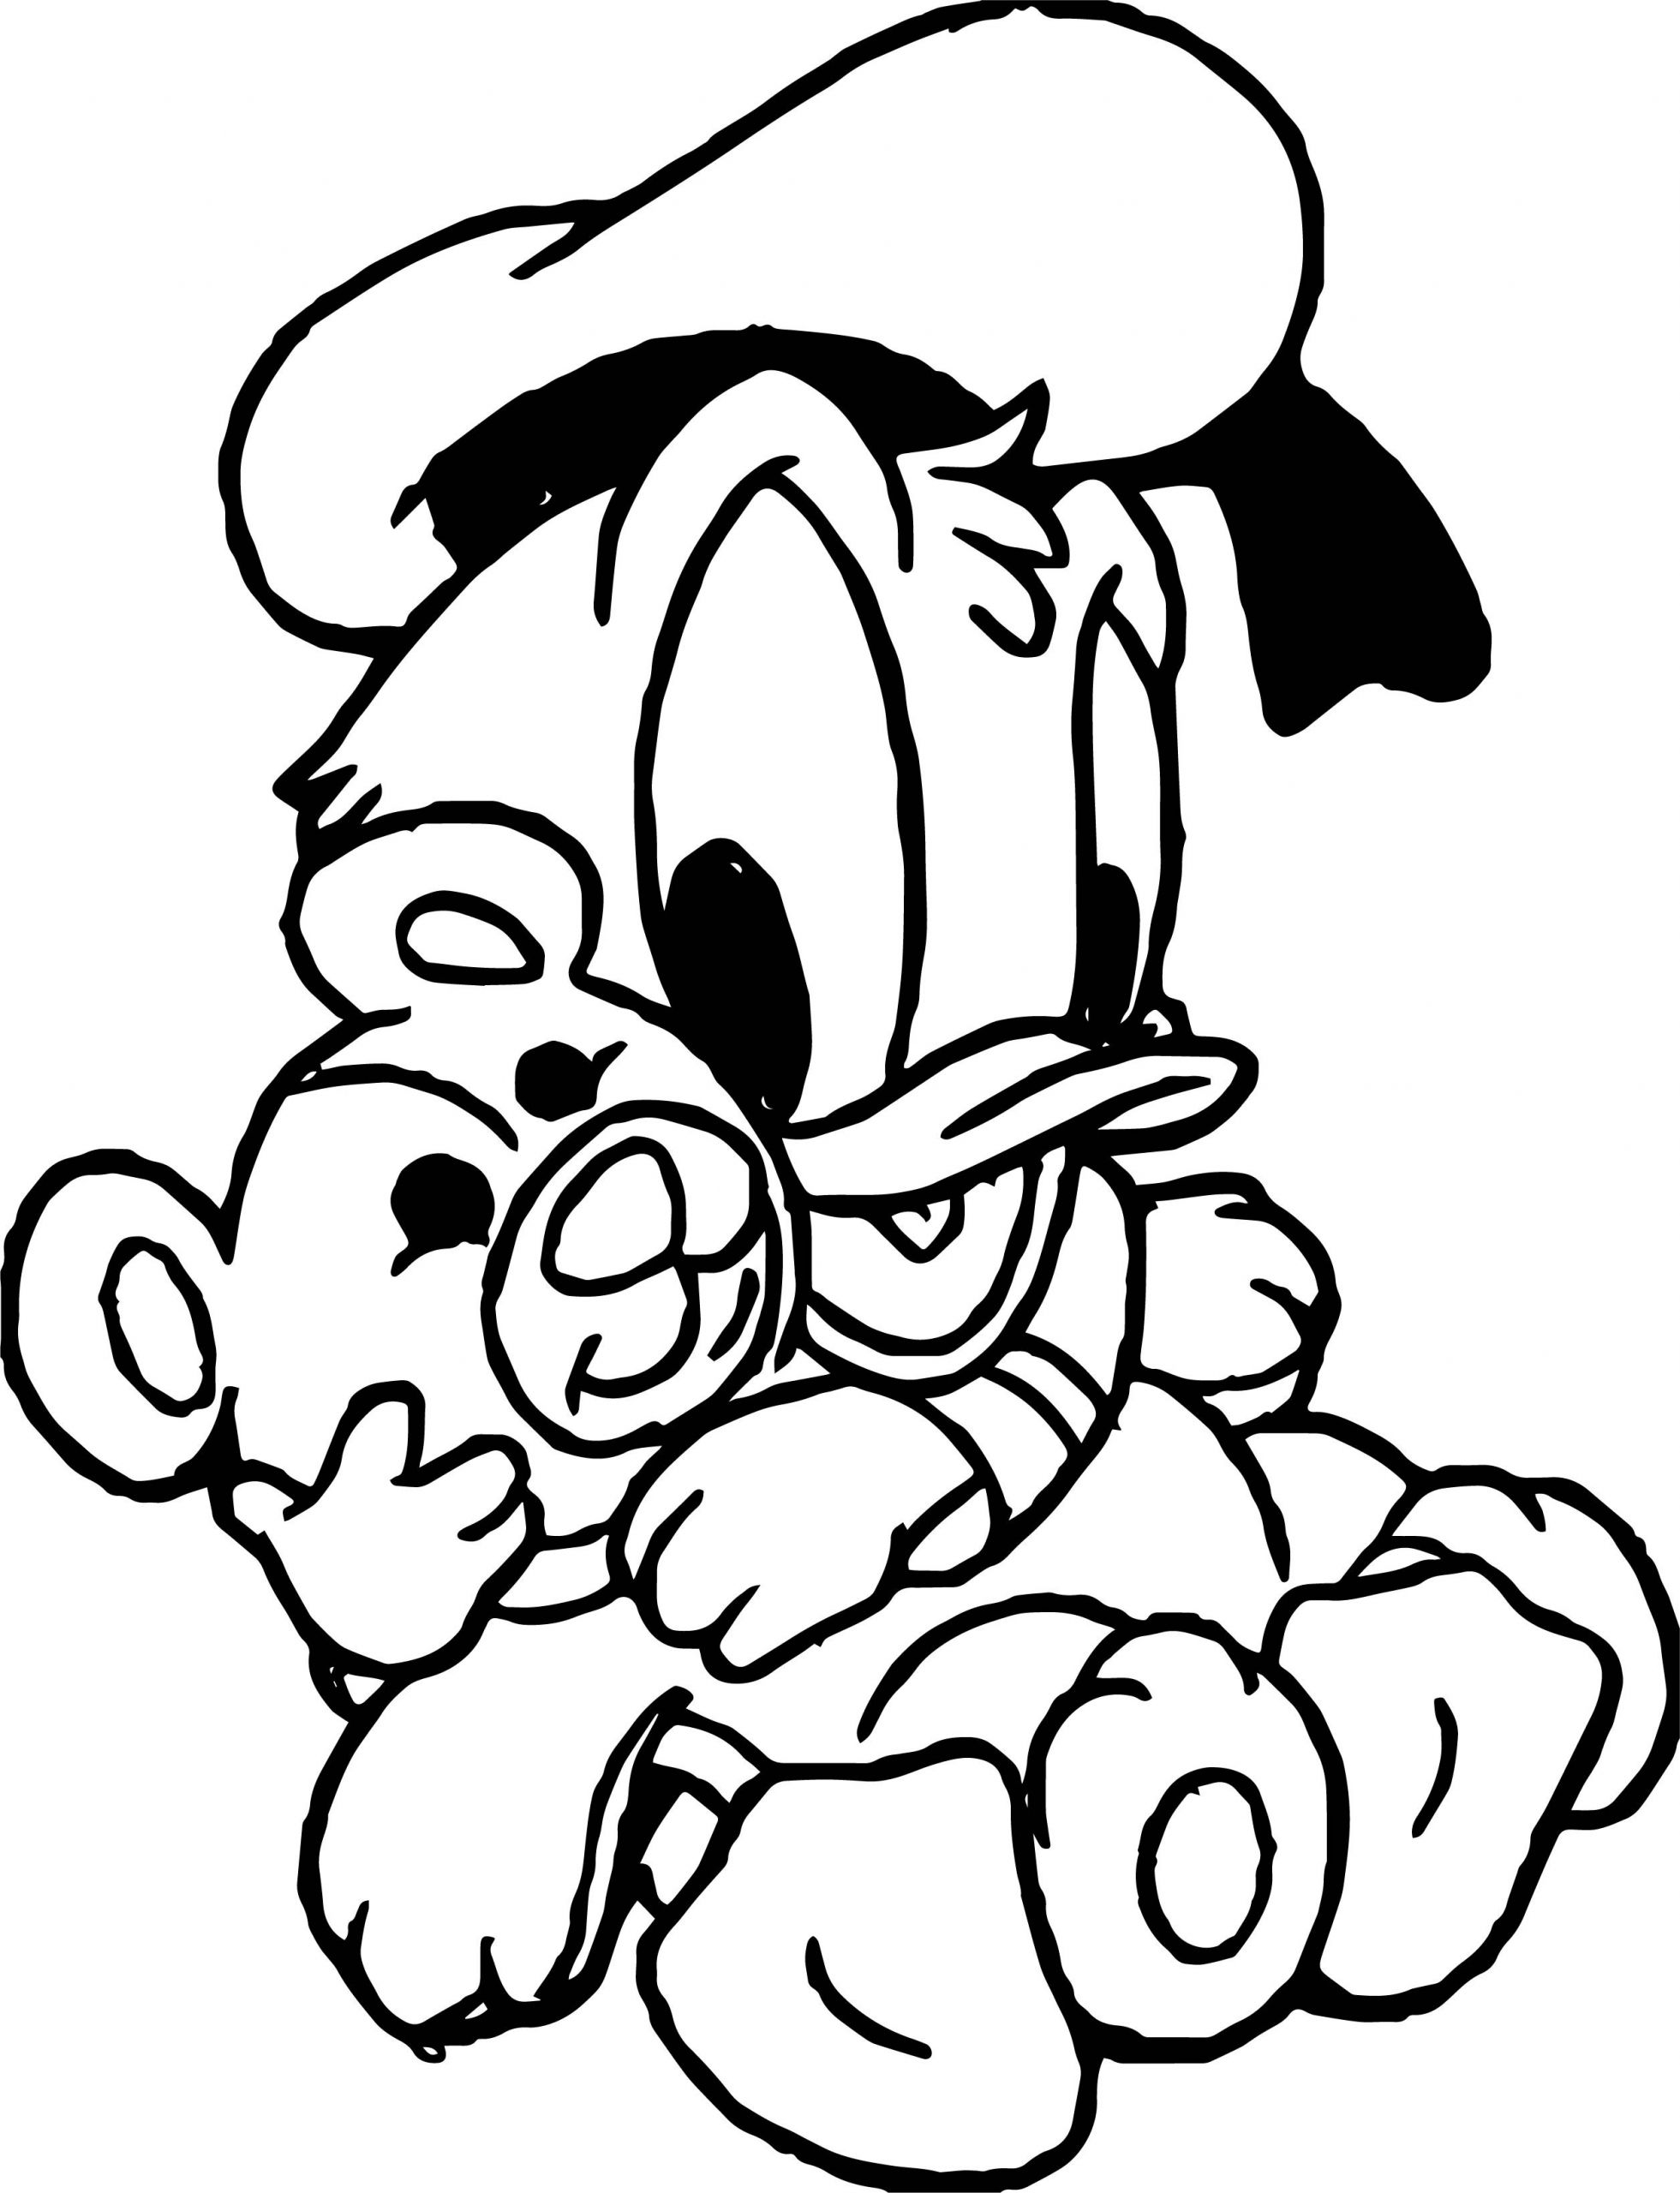 Baby Donald Duck Coloring Pages
 Baby Donald Donald Duck Coloring Page